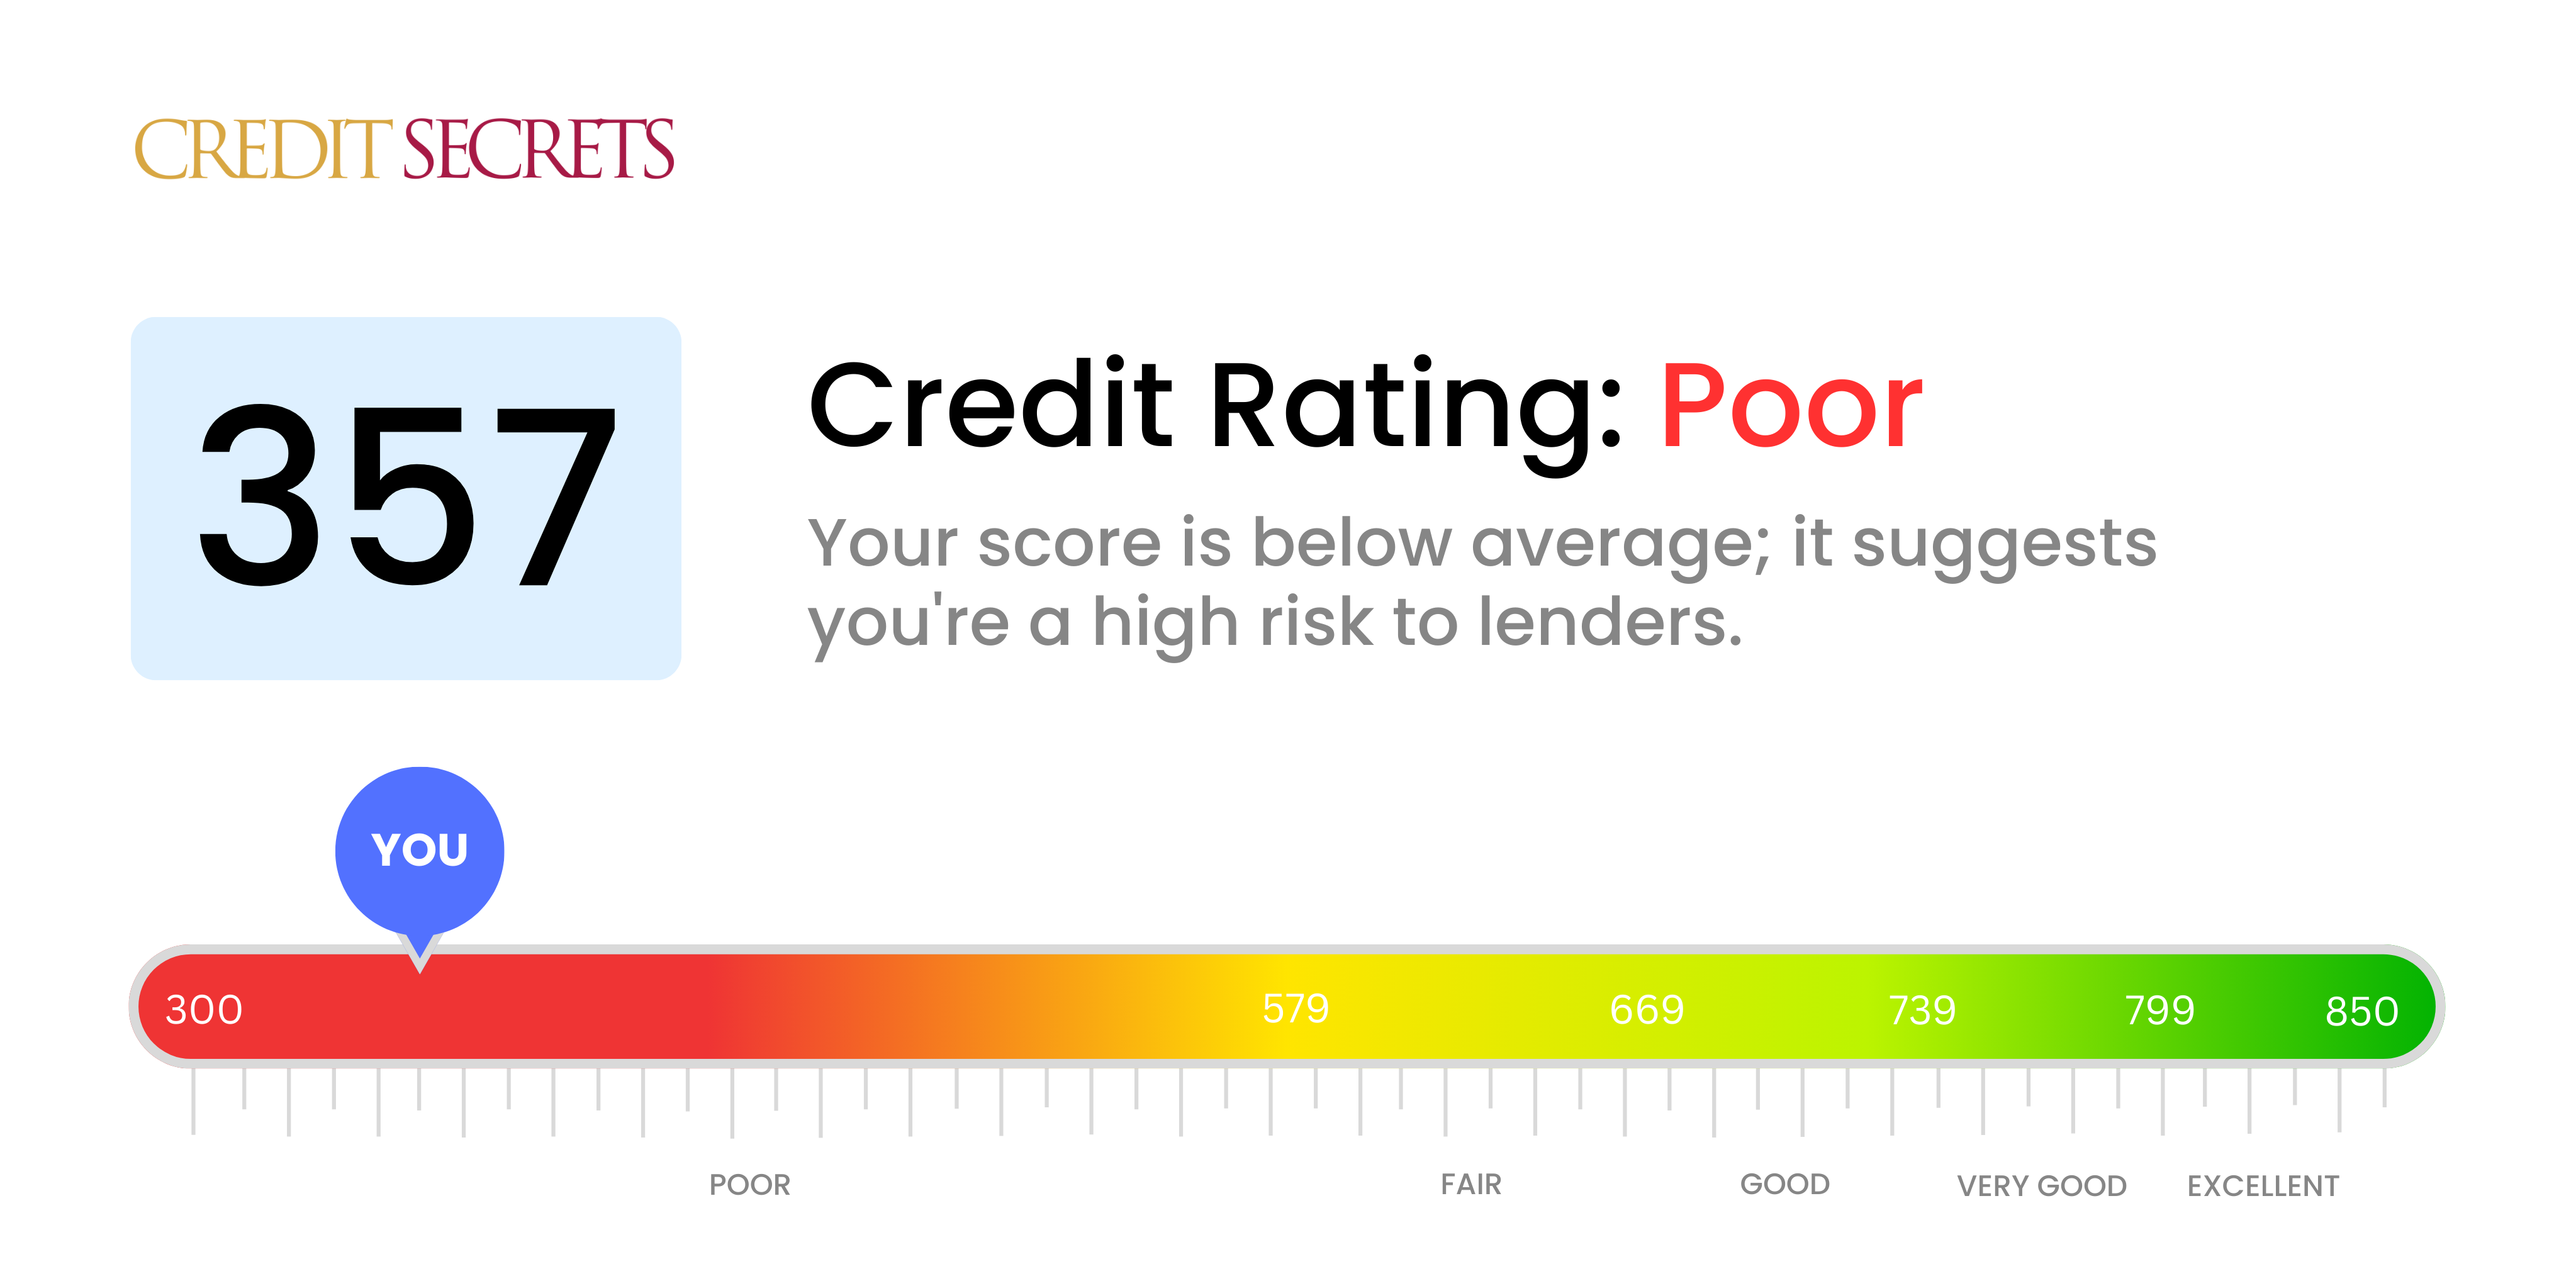 Is 357 a good credit score?